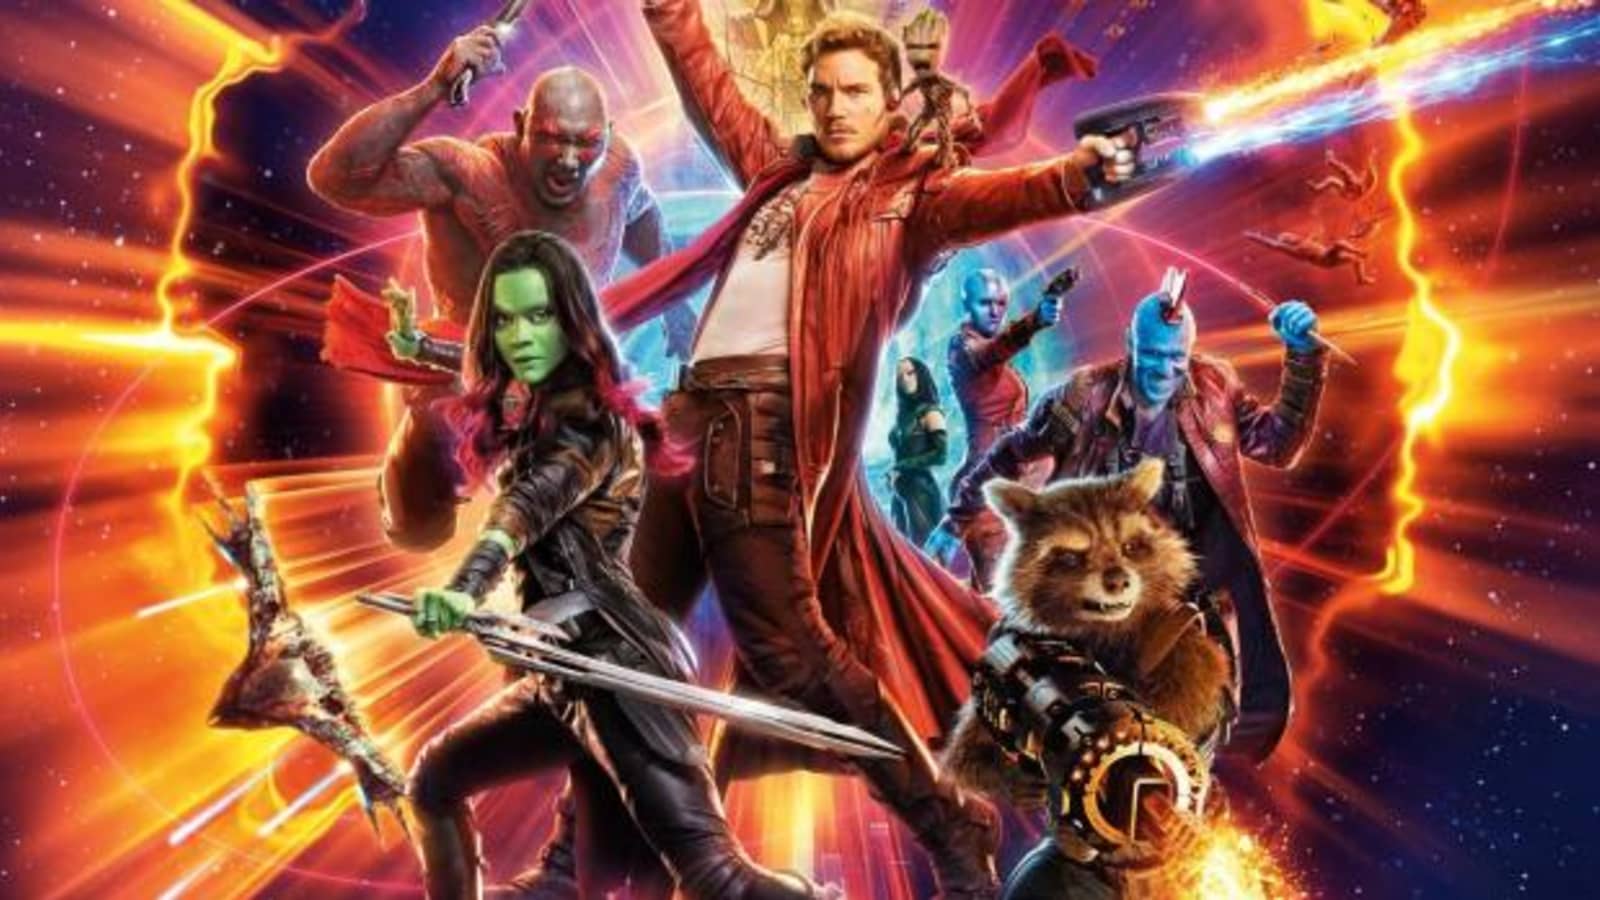 Guardians Of The Galaxy': One Time Underdog Returns With $145M Debut